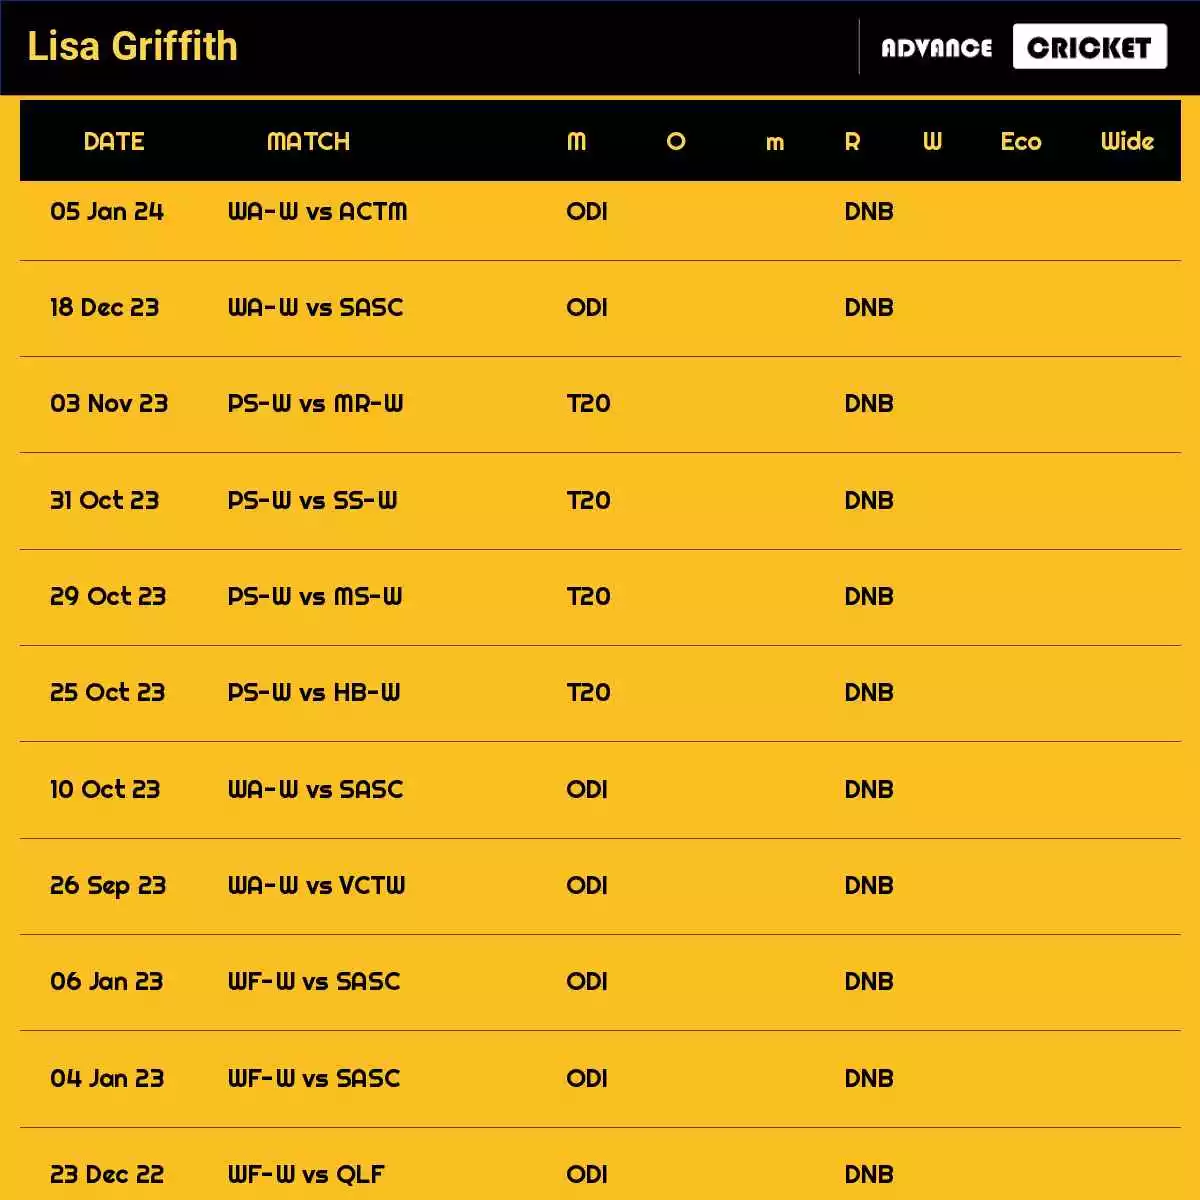 Lisa Griffith Recent Matches Details Date Wise